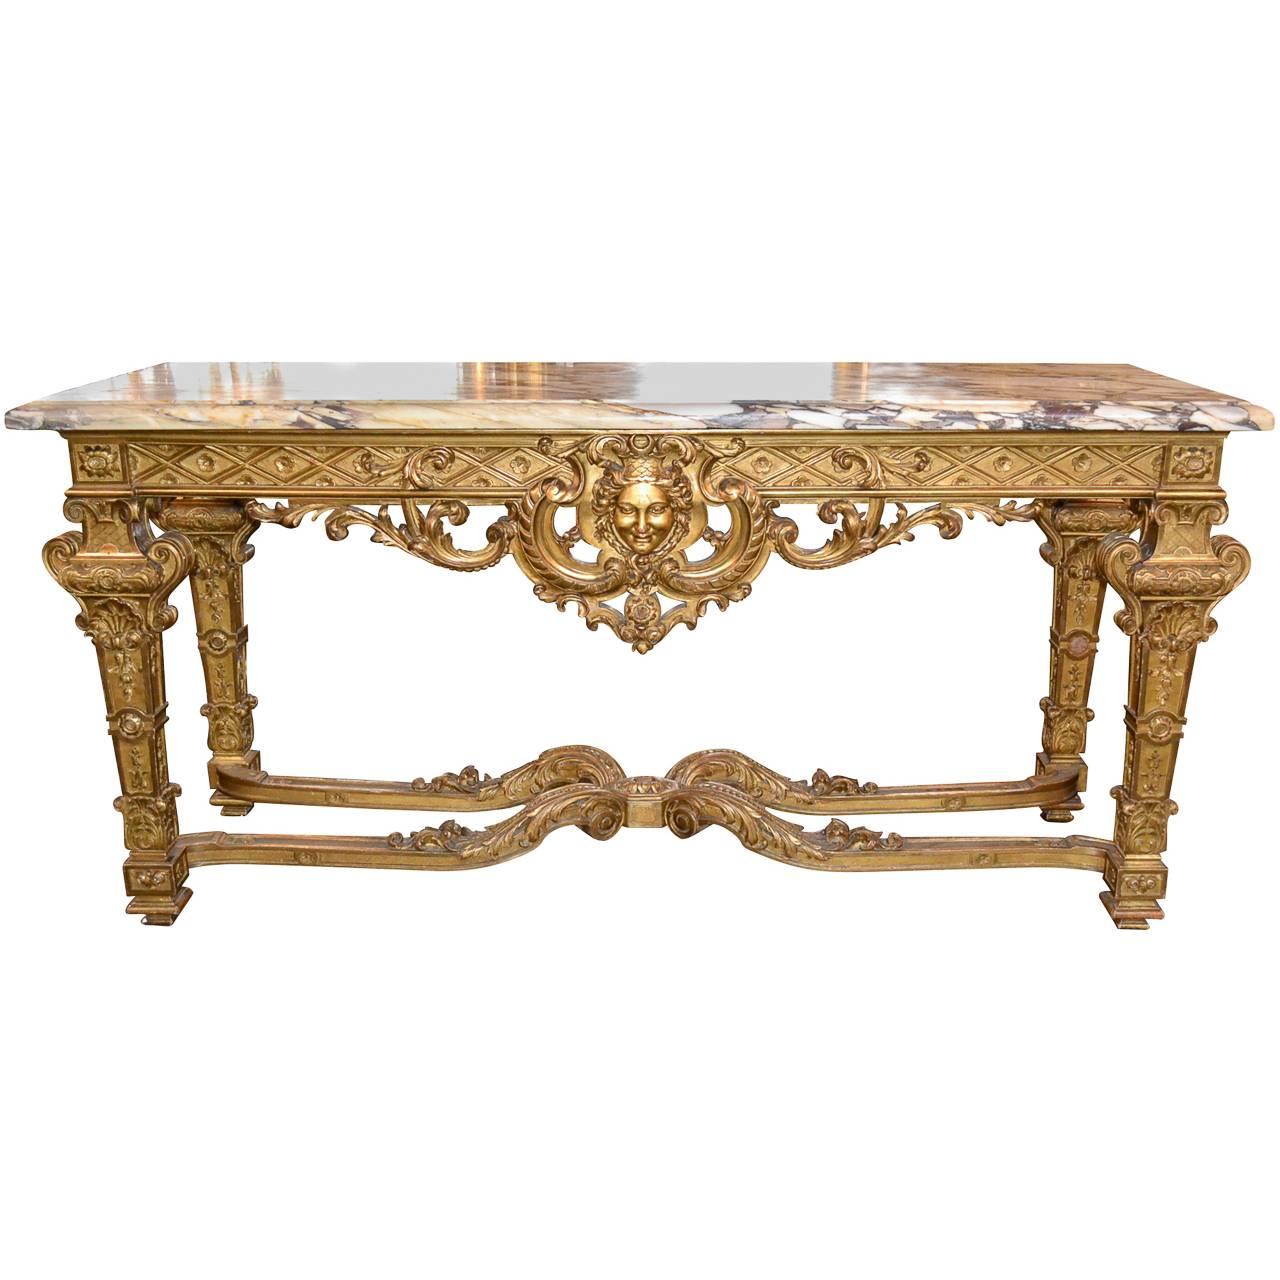 19th Century French Regency Giltwood Console